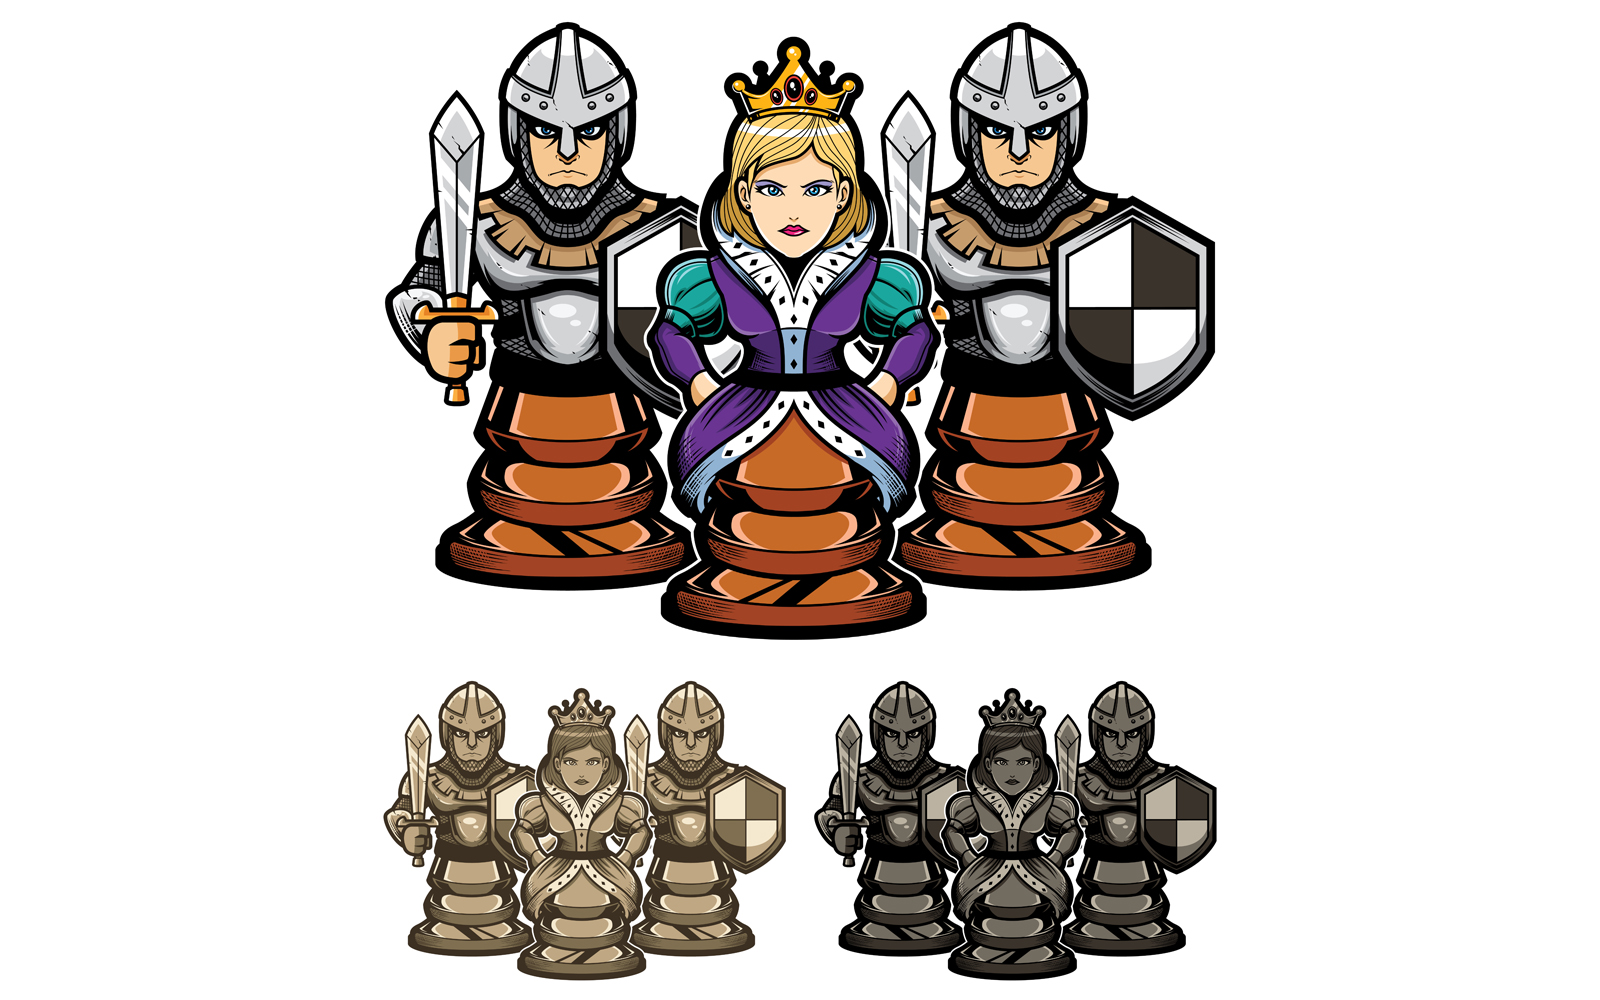 Chess Queen and Pawns - Illustration